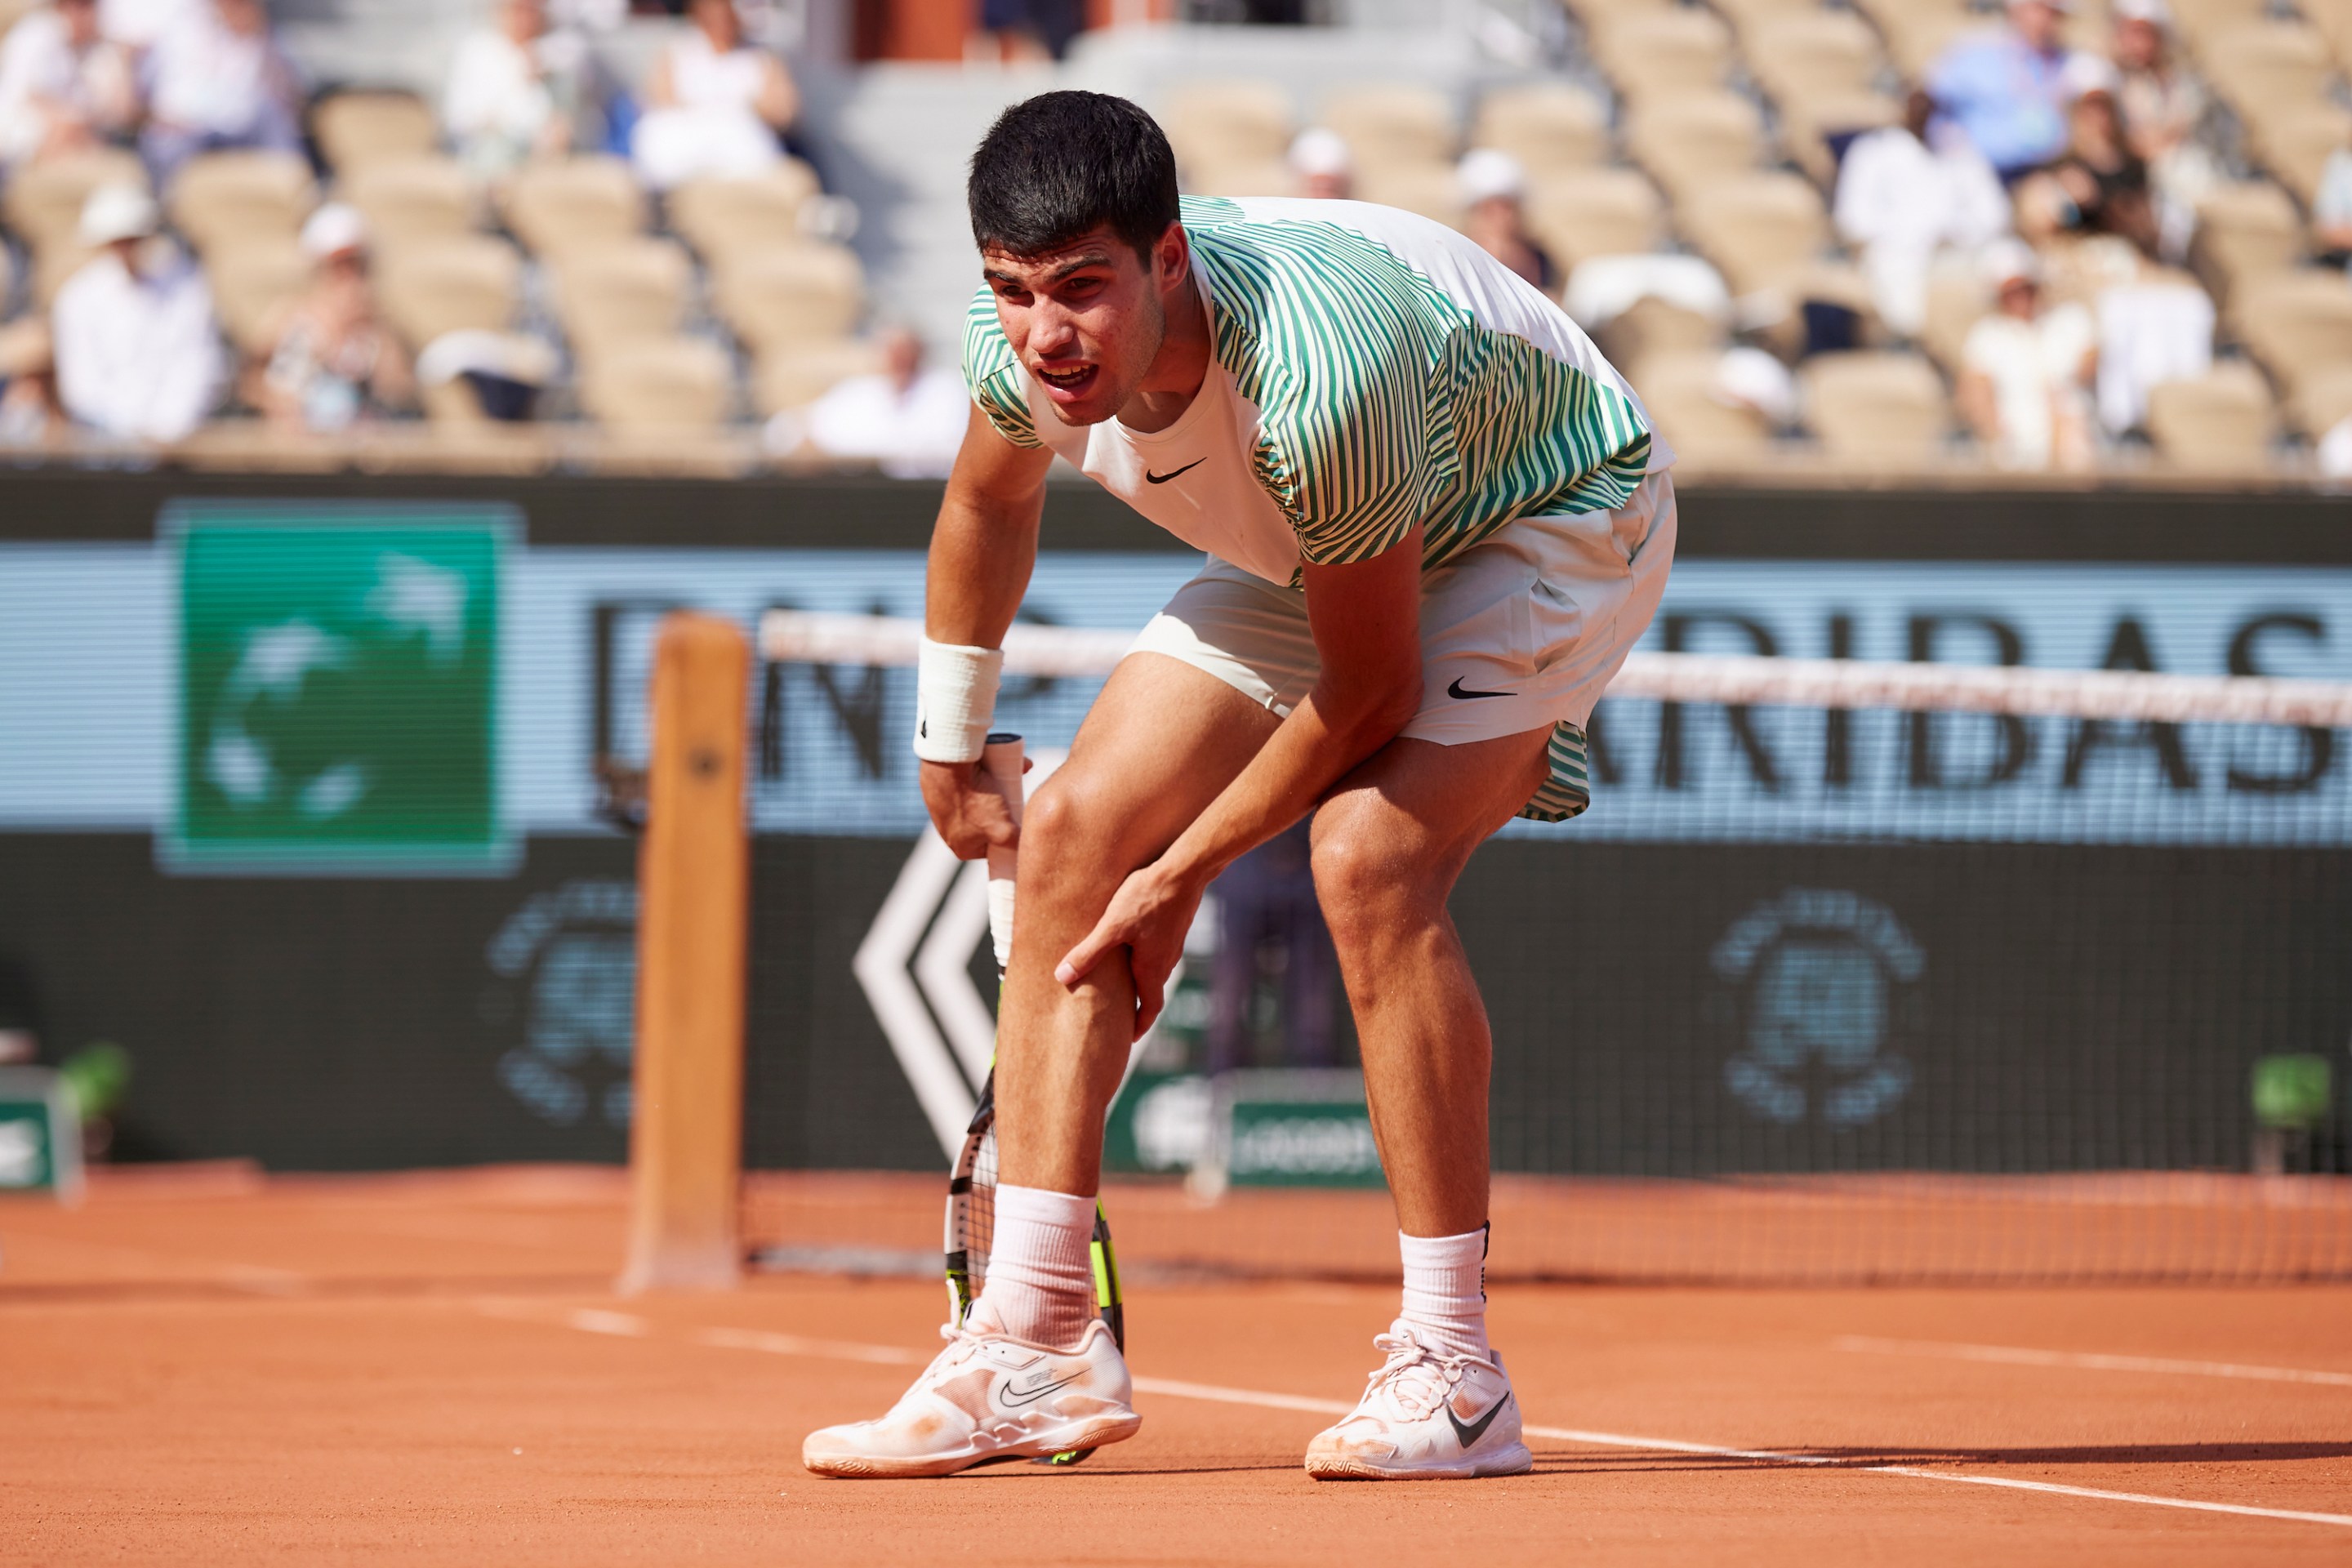 PARIS, FRANCE - JUNE 09: Carlos Alcaraz of Spain appears to be injured against Novak Djokovic of Serbia during the Men's Singles Semi Final match on Day Thirteen of the 2023 French Open at Roland Garros on June 09, 2023 in Paris, France.